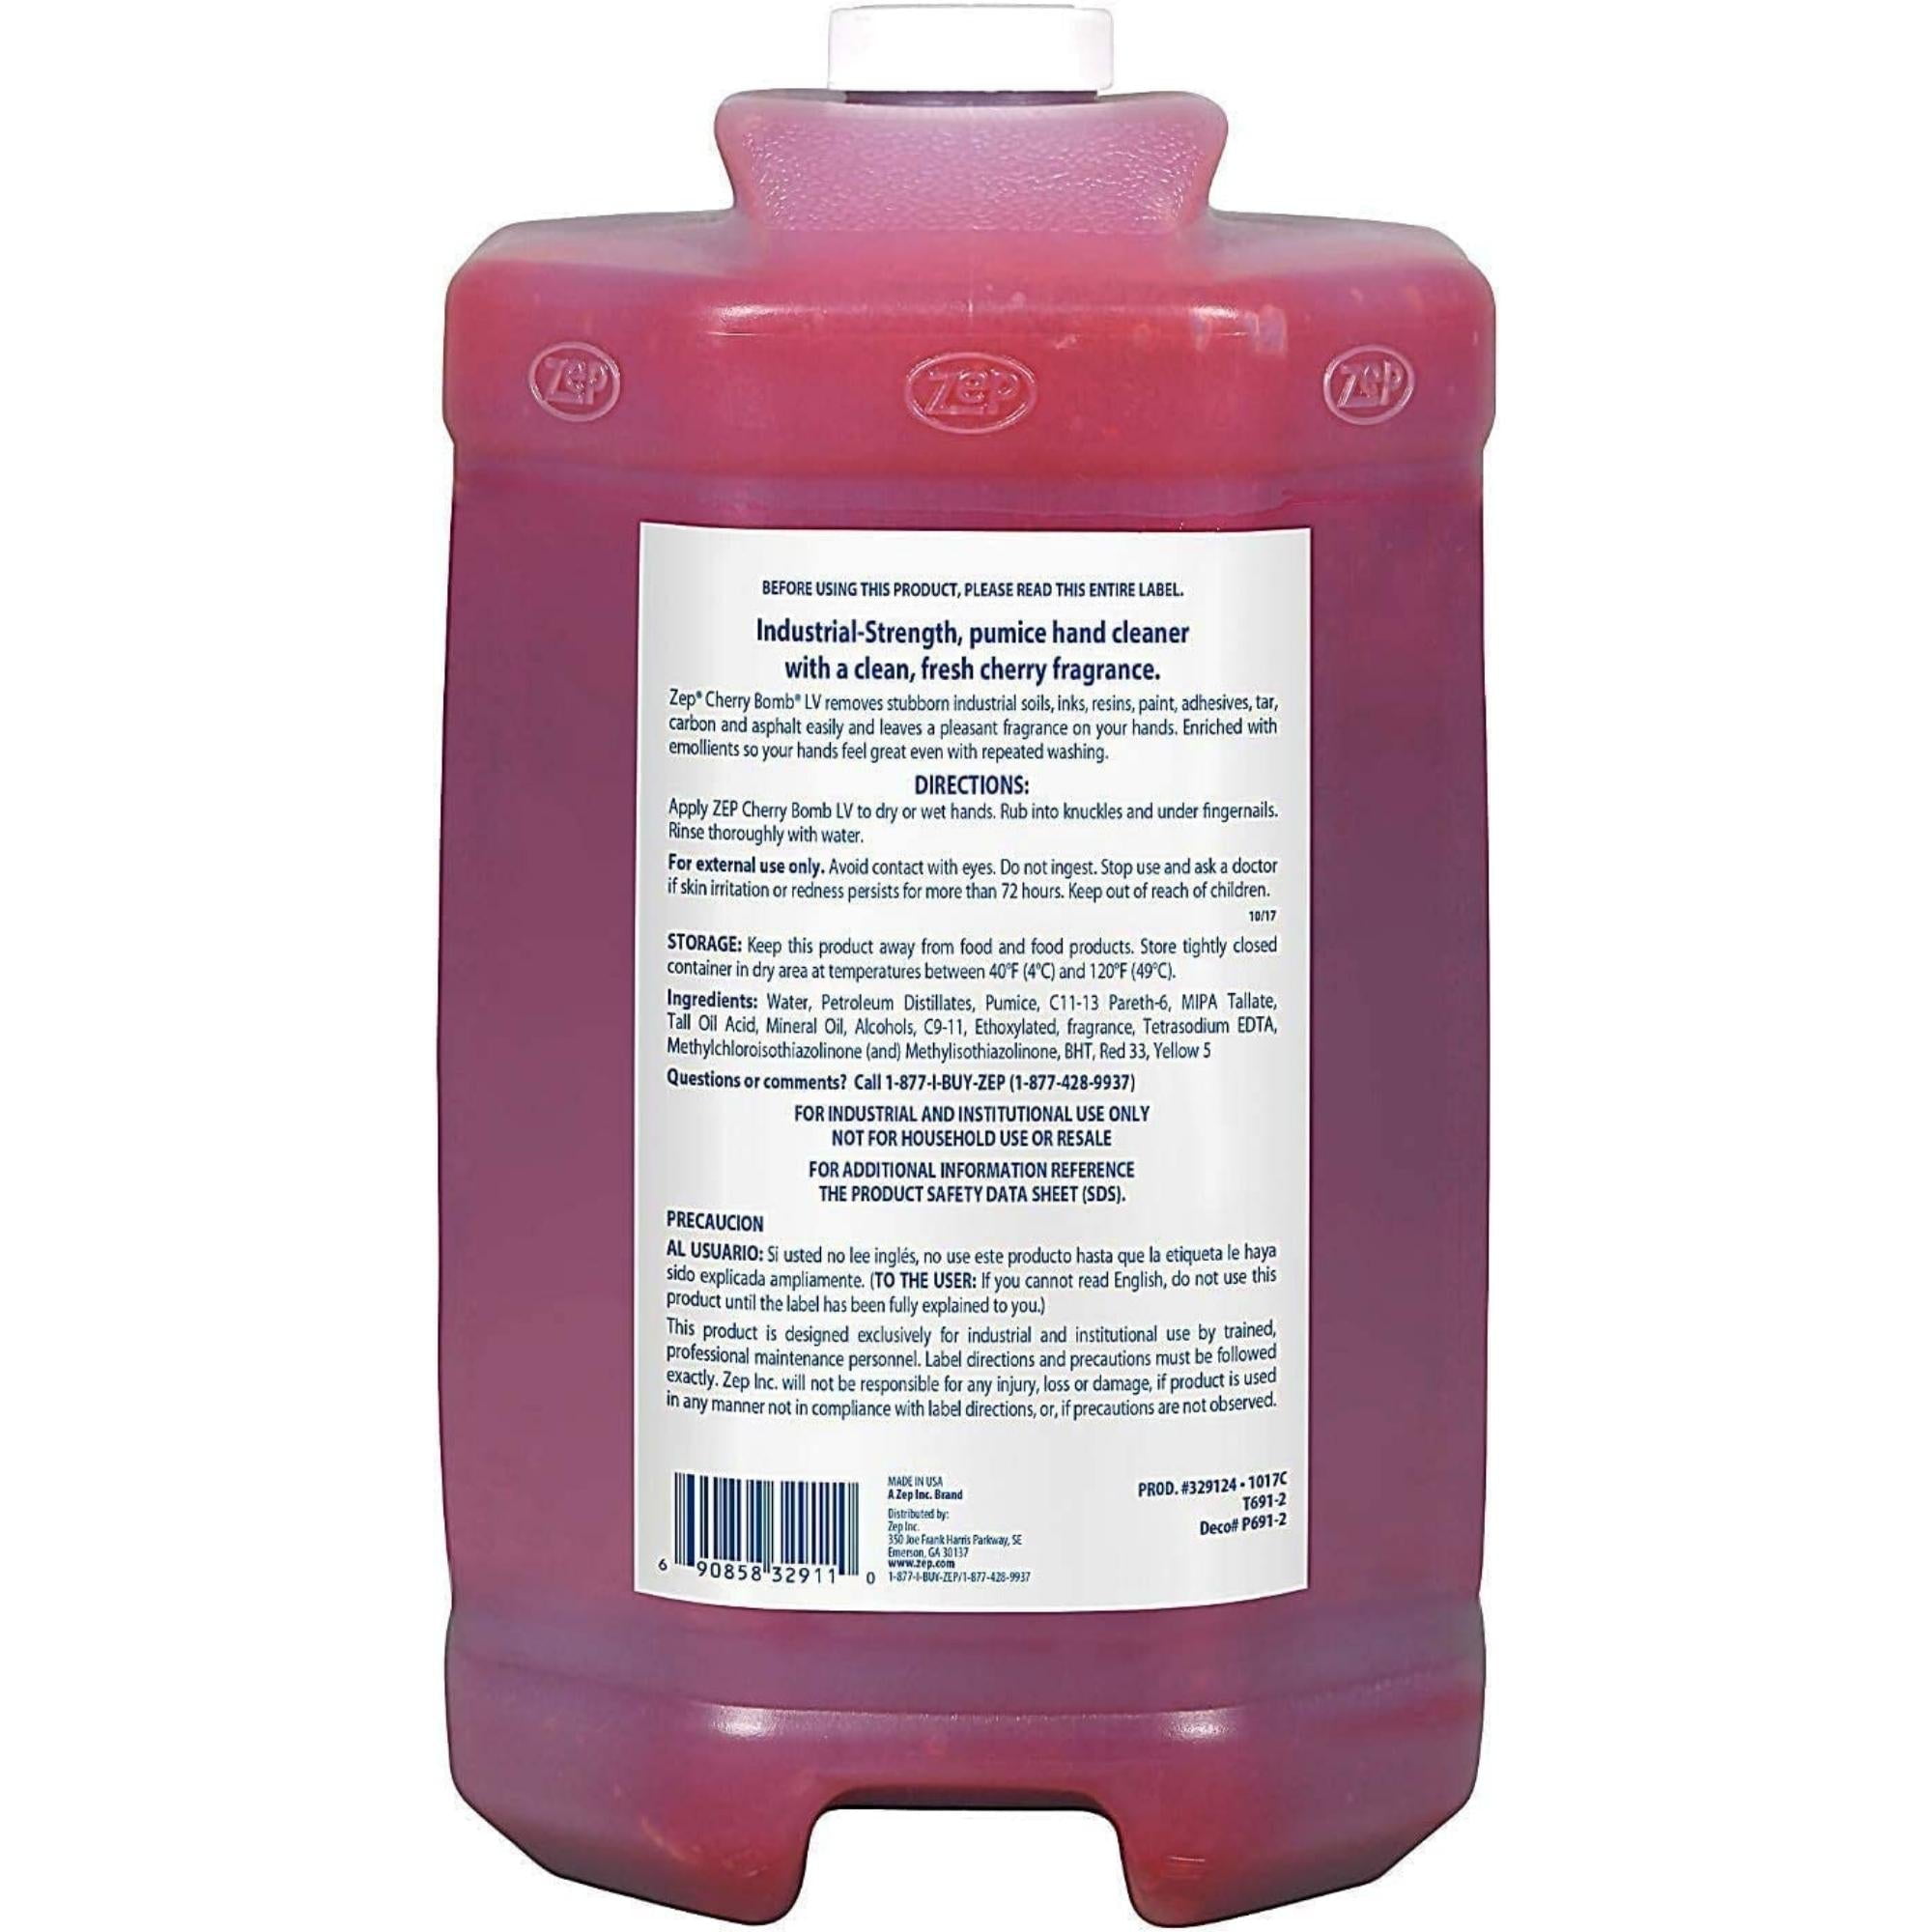 Zep Cherry Bomb Hand Cleaner 1 Gal - Refill Only - Pump not Included (2)…